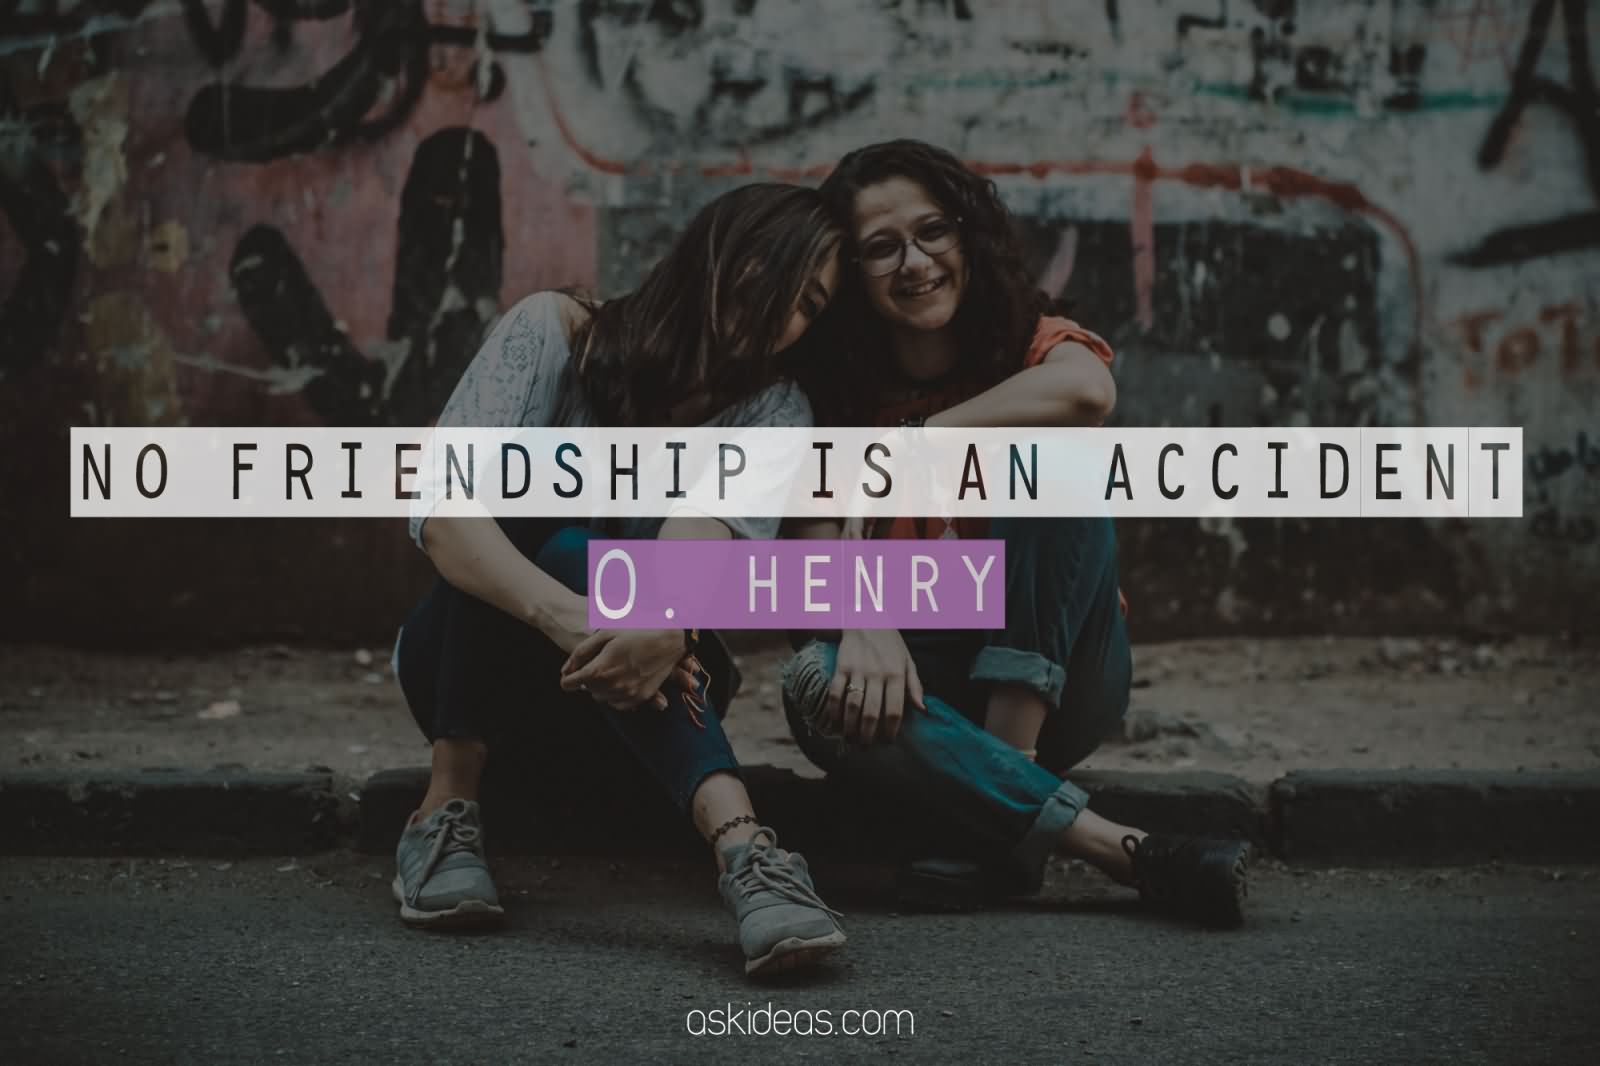 No friendship is an accident.